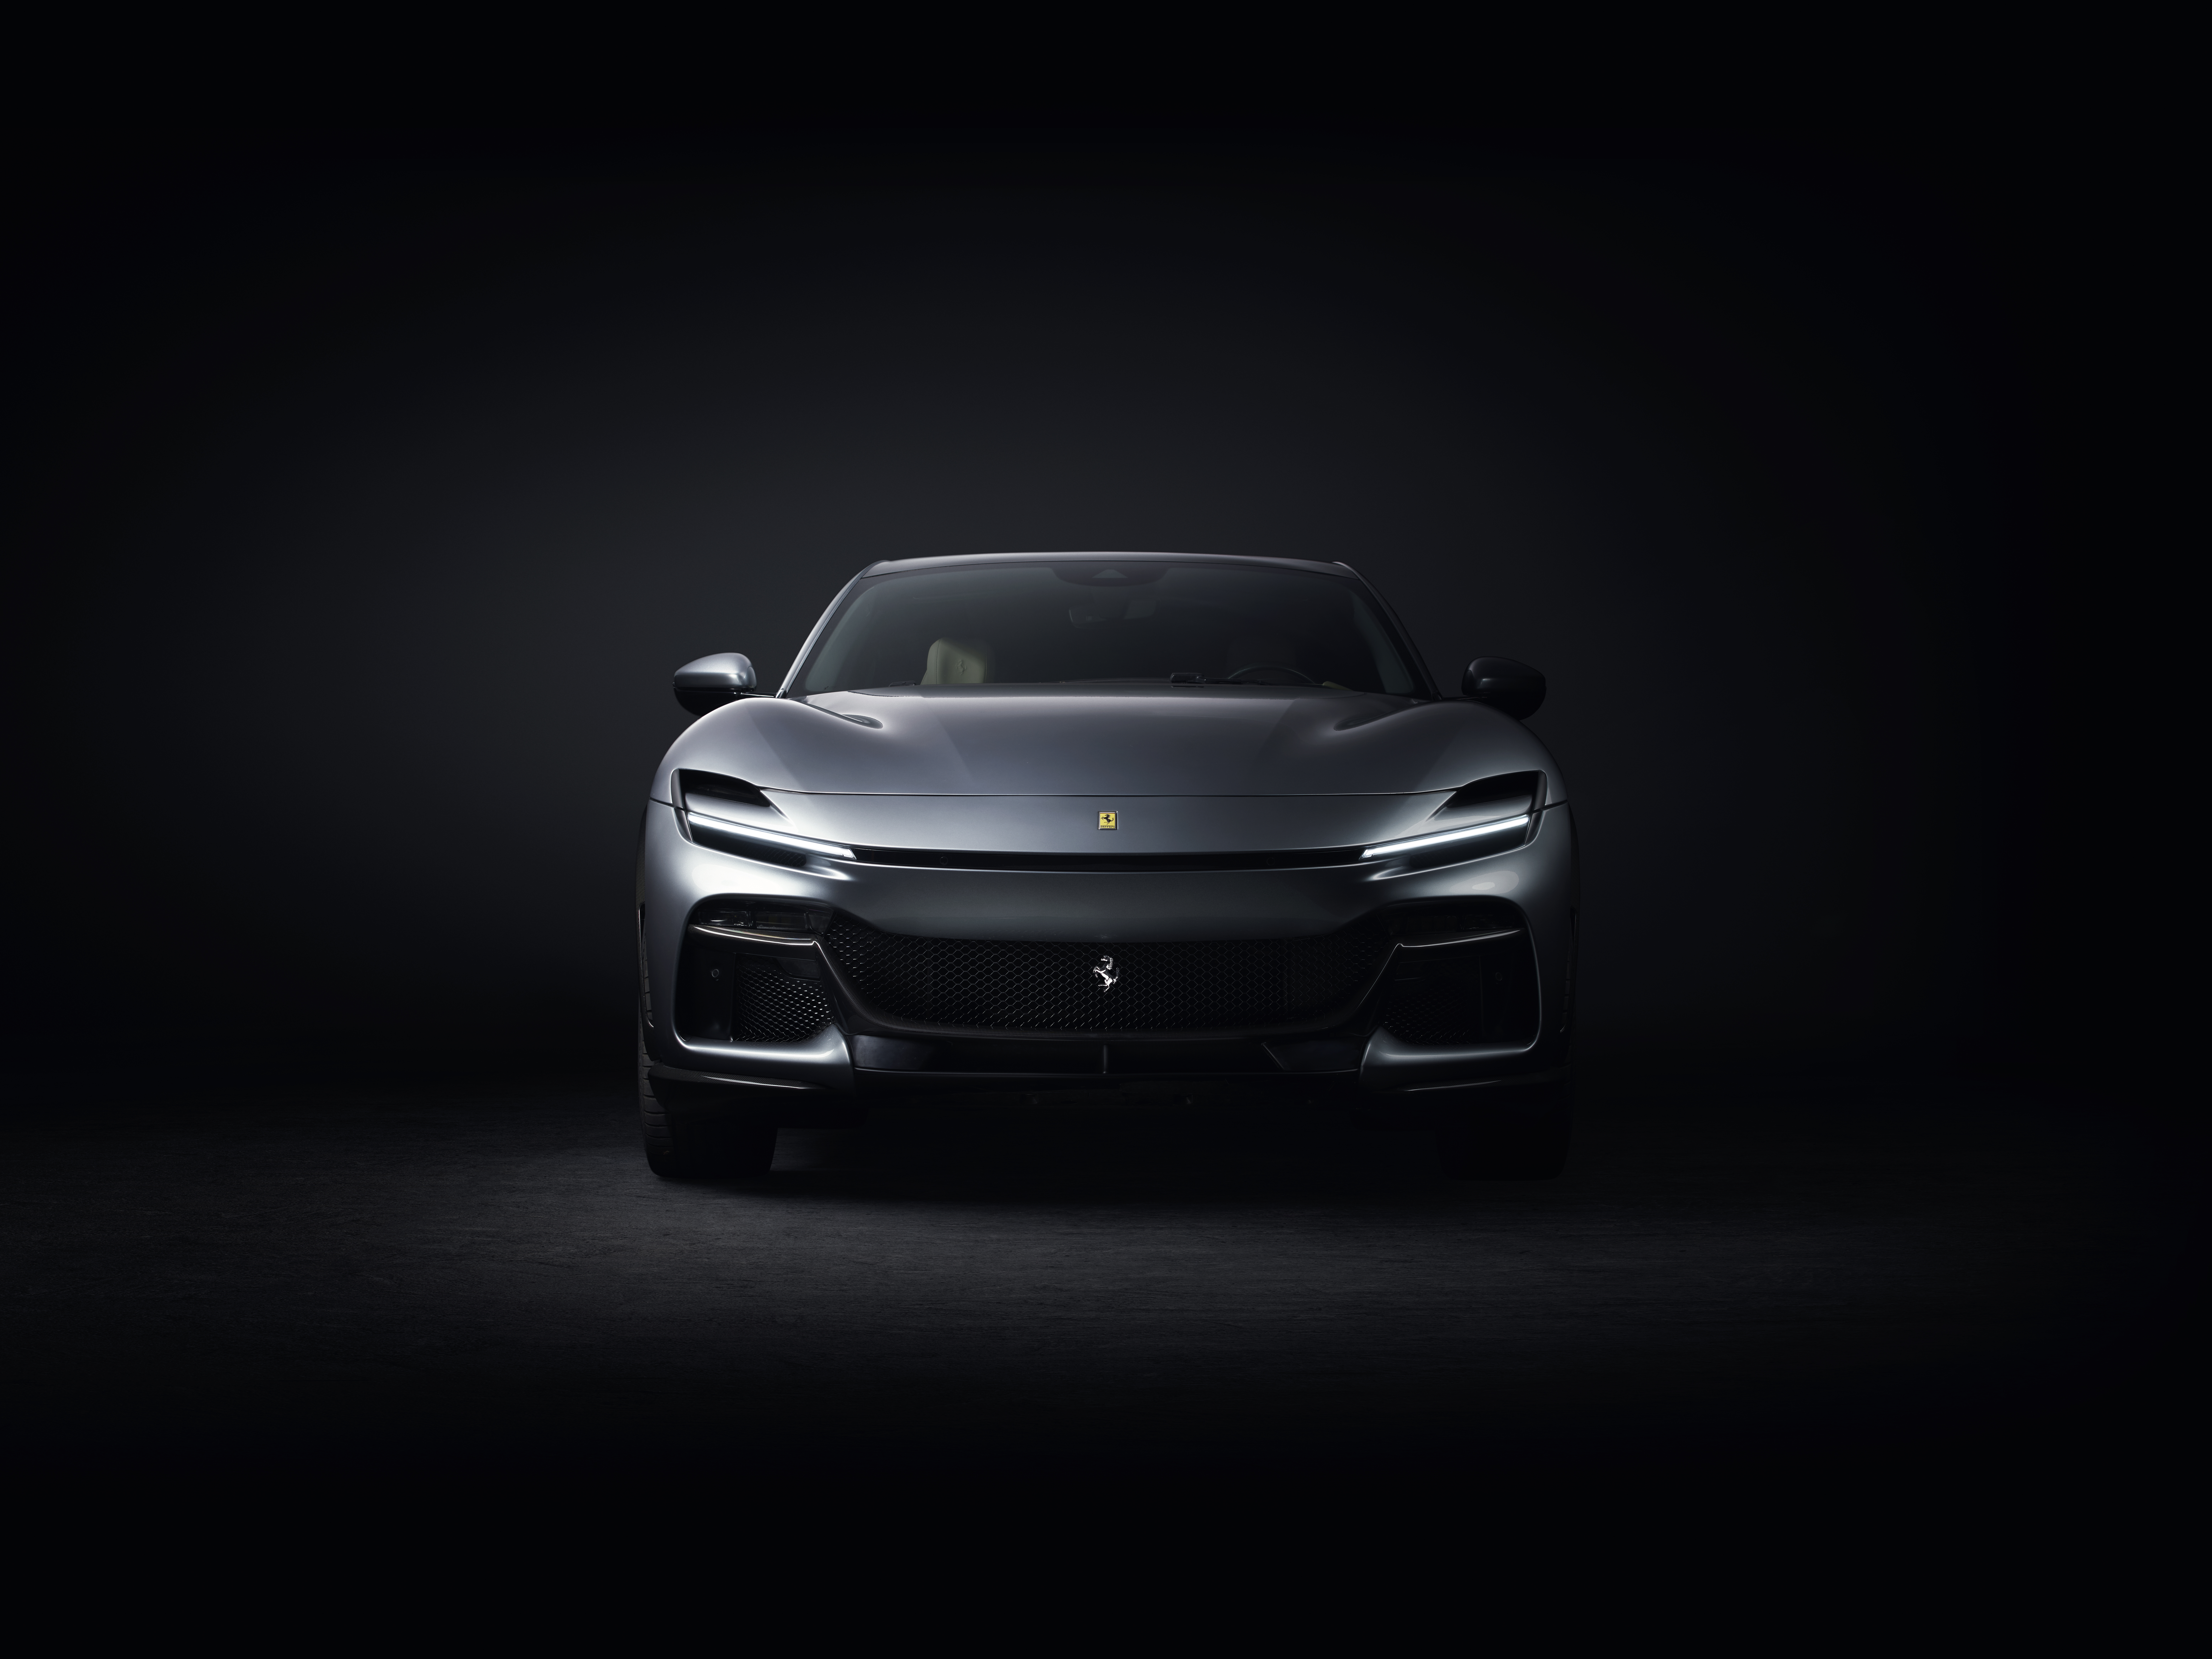 You can pay your next Ferrari with crypto